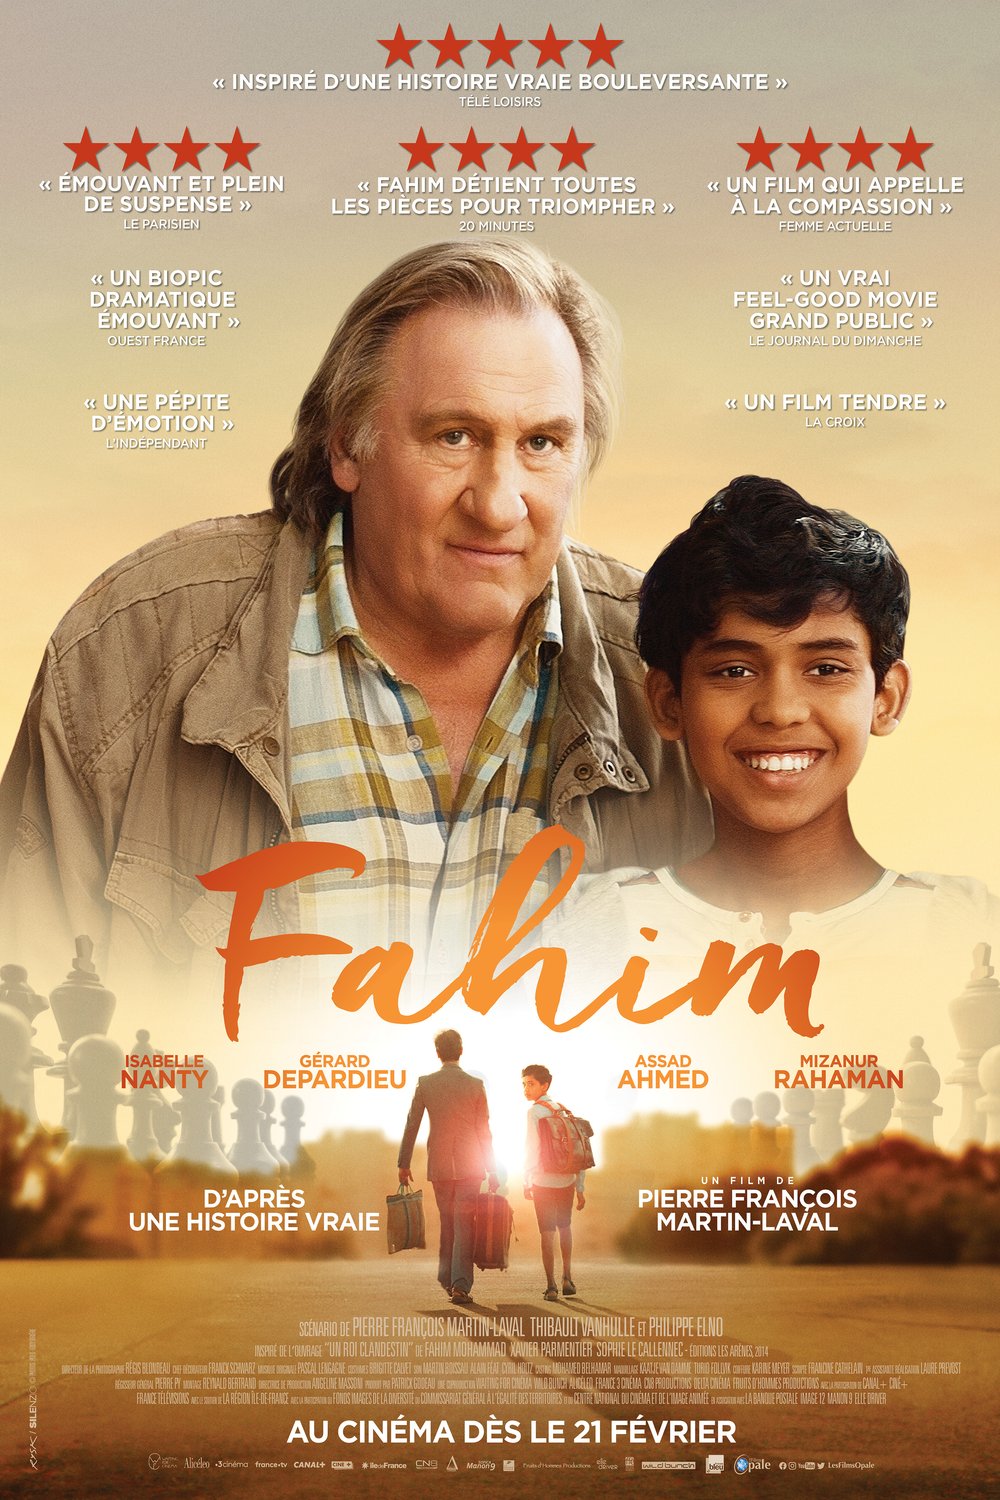 Poster of the movie Fahim